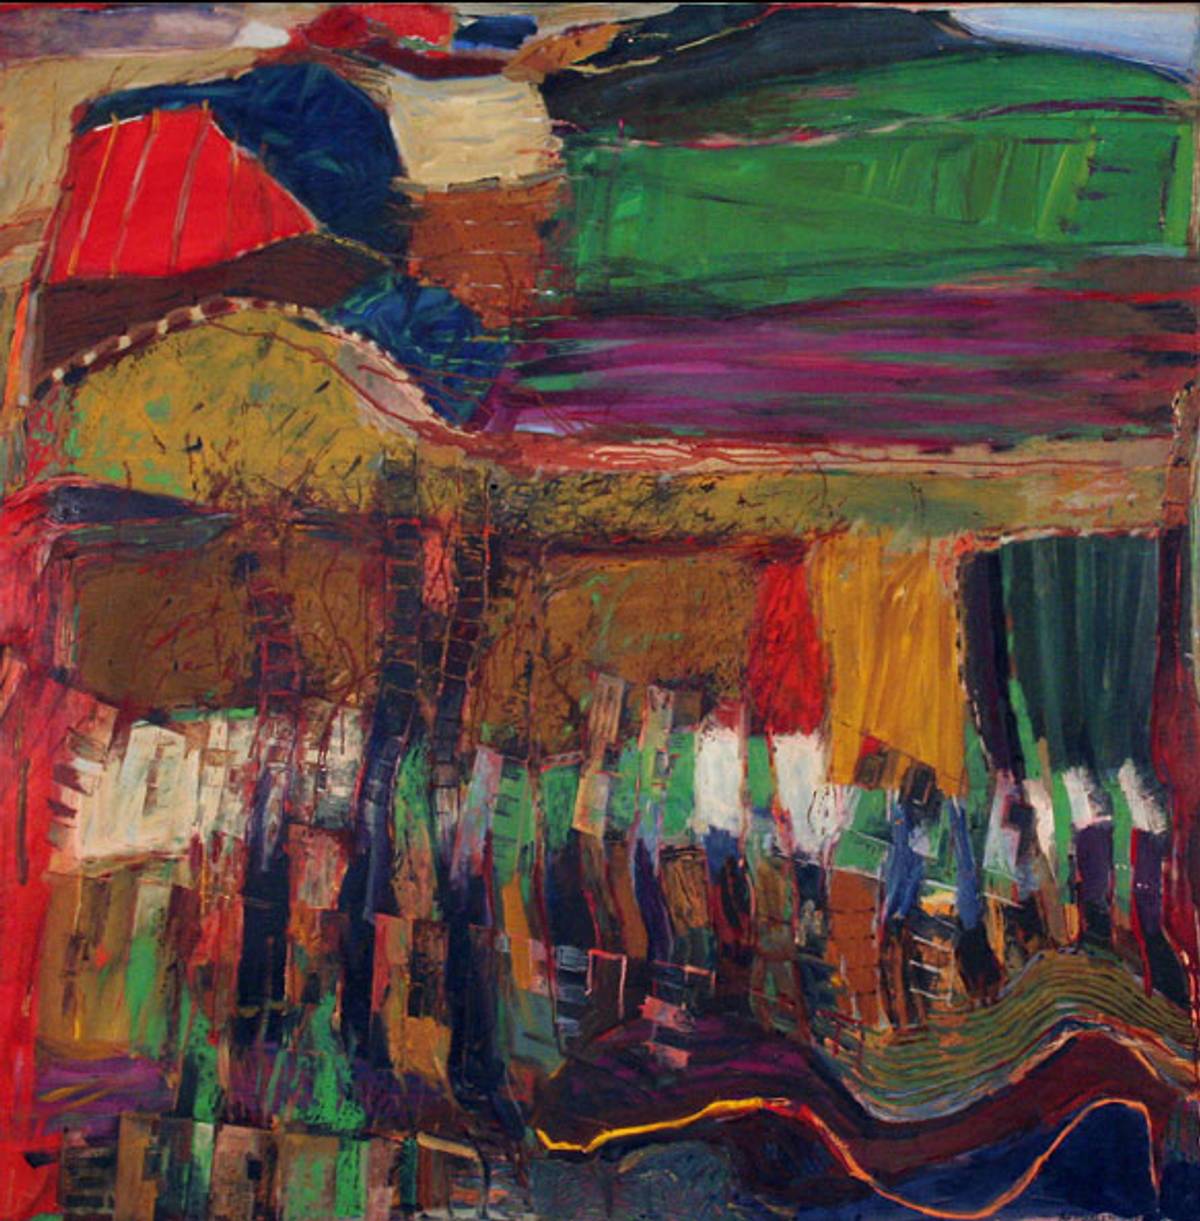 ‘Landscape of the River Sola,’ a 1966 painting depicting The Sola, which flows beside Auschwitz. Pachner considered it his finest work. (Courtesy the Pachner family)